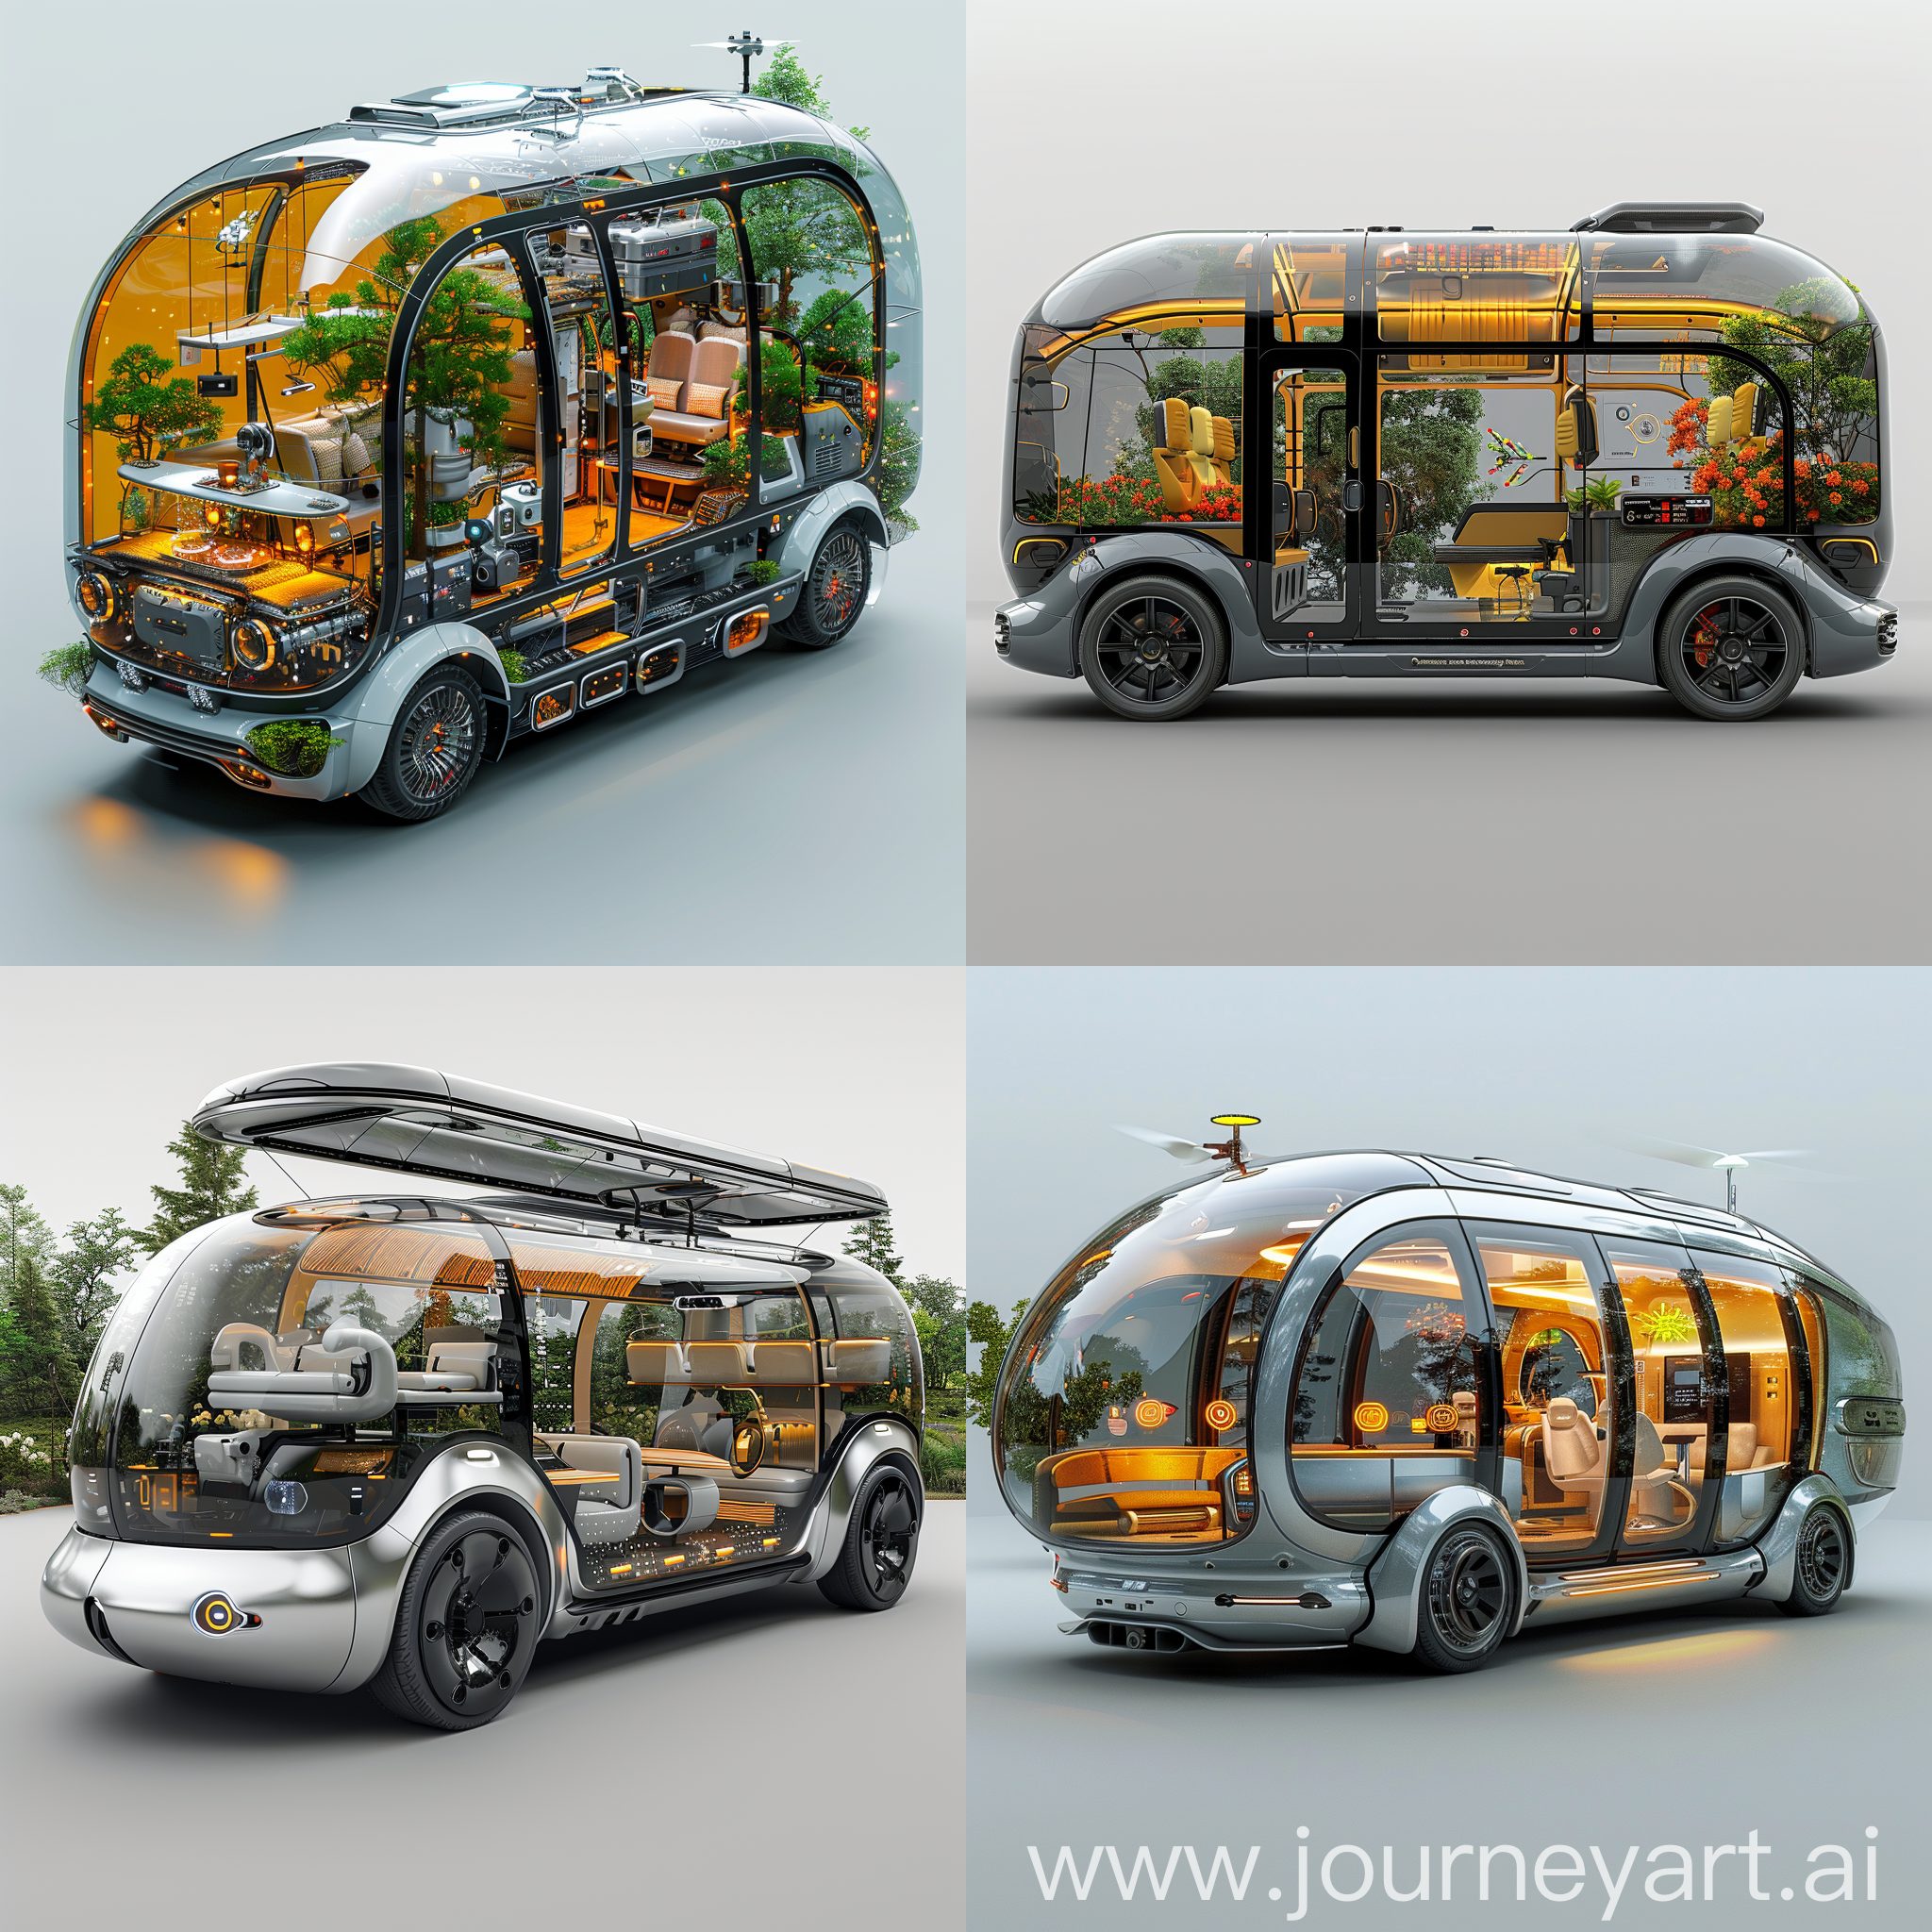 Ultramodern, futuristic microbus, Self-Driving Capability, Panoramic Sunroof, Modular Interior, AI Assistant, Voice-Activated Controls, Transparent OLED Displays, Recycled and Sustainable Materials, Kinetic Energy Harvesting, Chameleon Paint Job, Drone Delivery System, octane render --stylize 1000